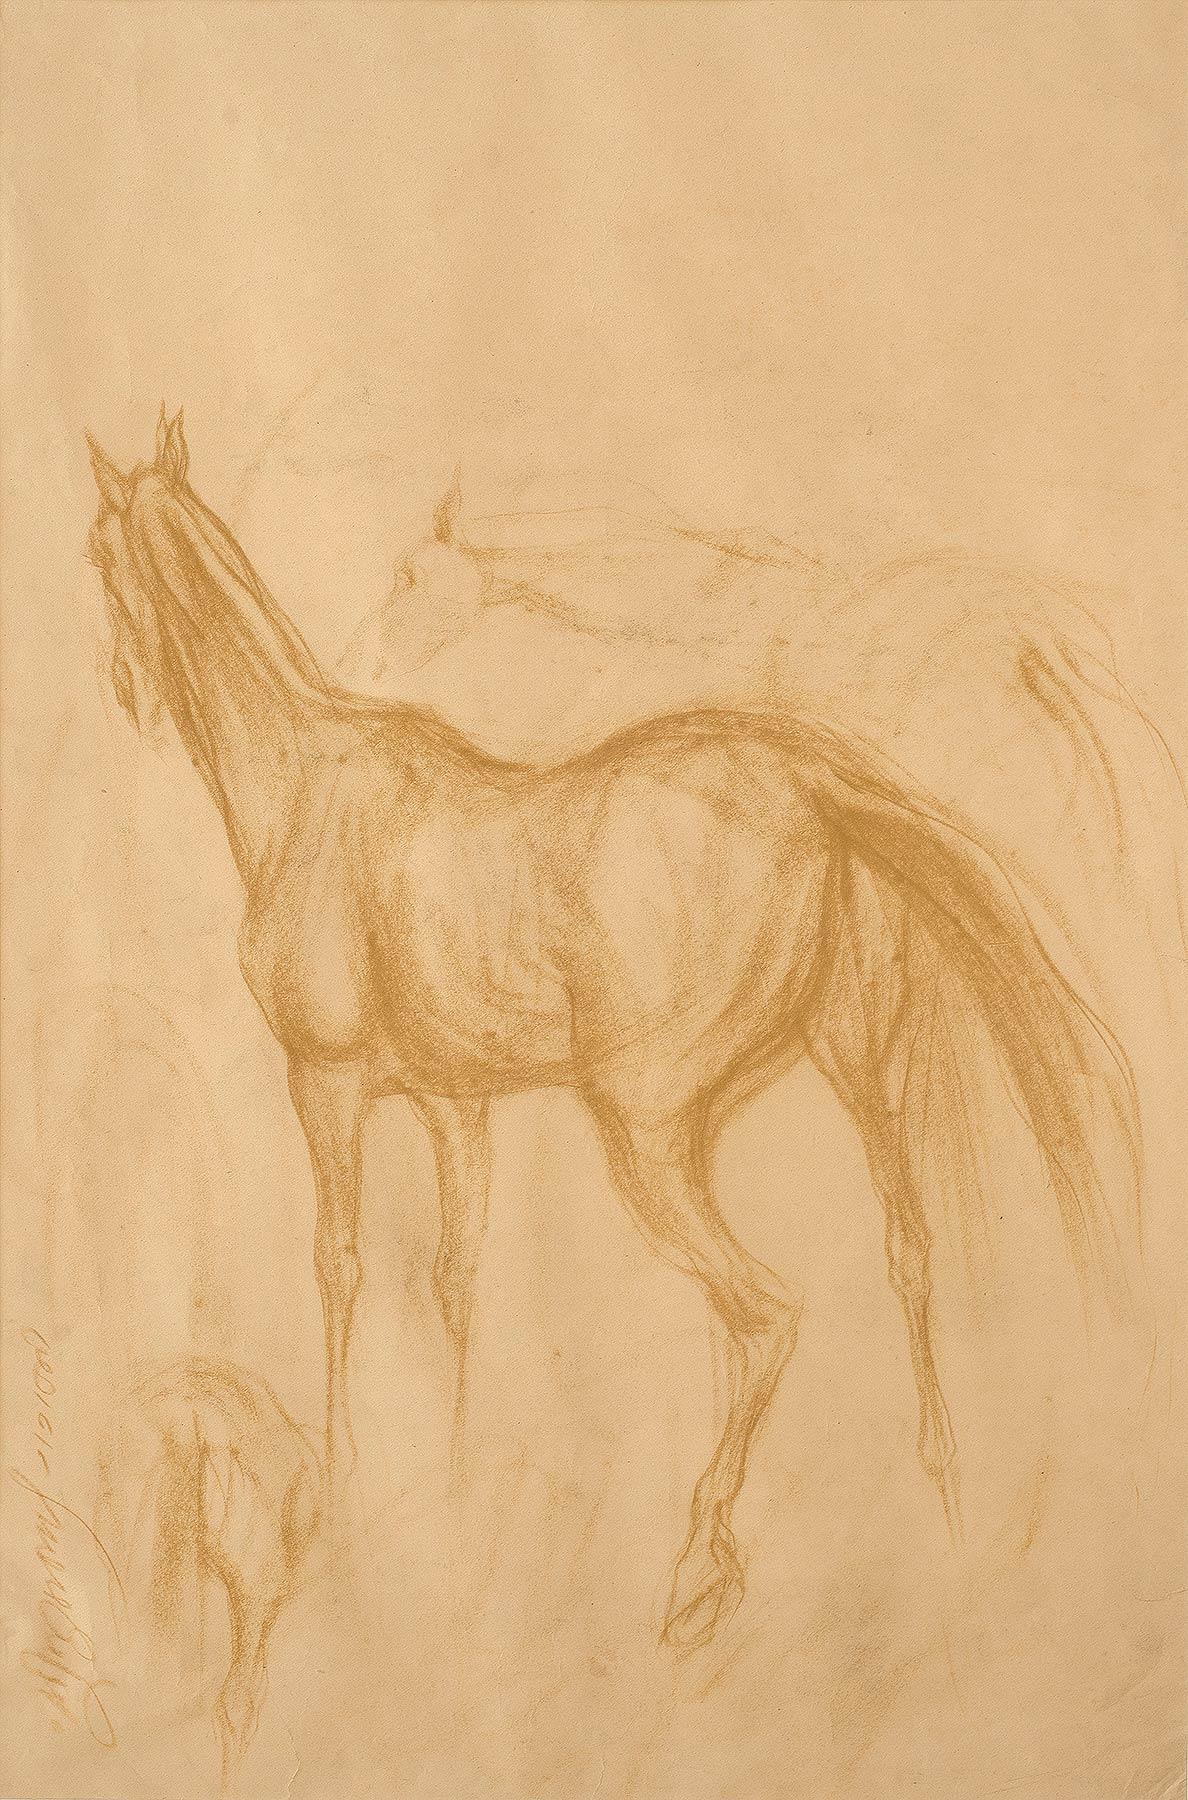 Sunil Das Animal Art - Early Horses III, Drawing, Brown, Conte on Paper by Indian Artist "In Stock"